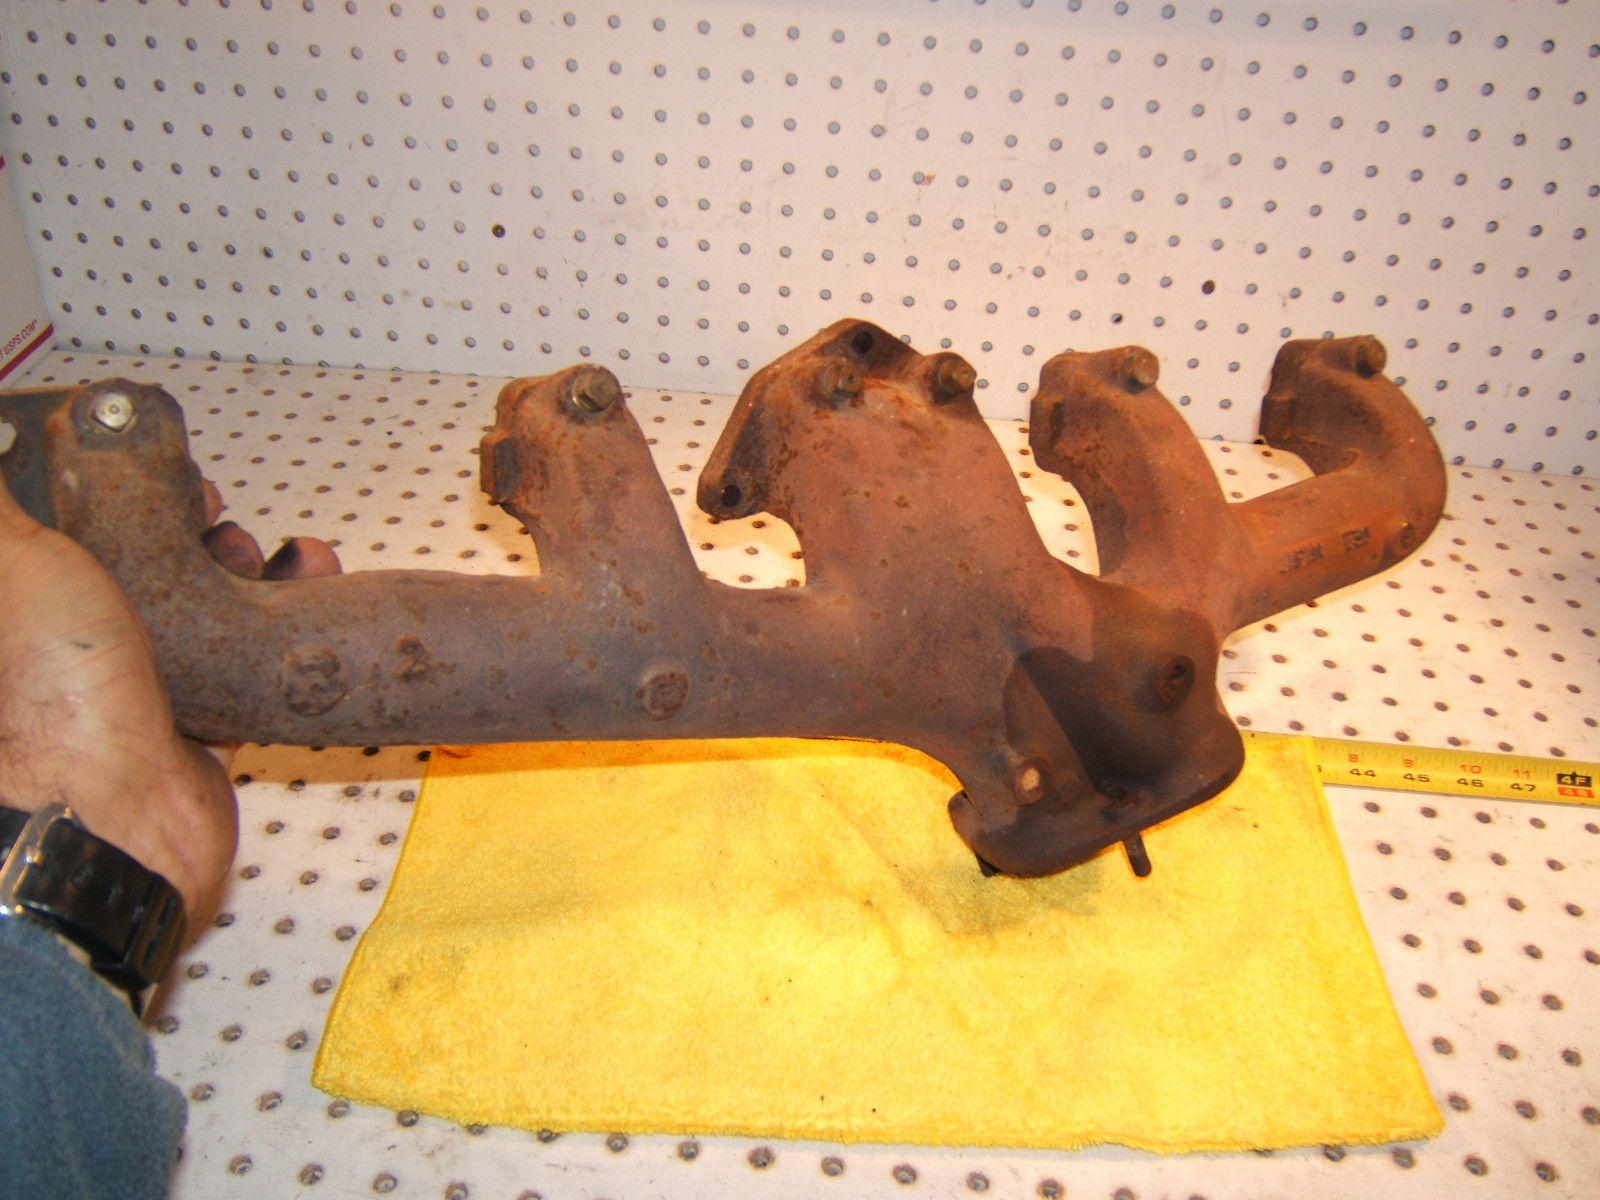 Exhaust Manifolds I must own $15k worth based on this - Internet Finds